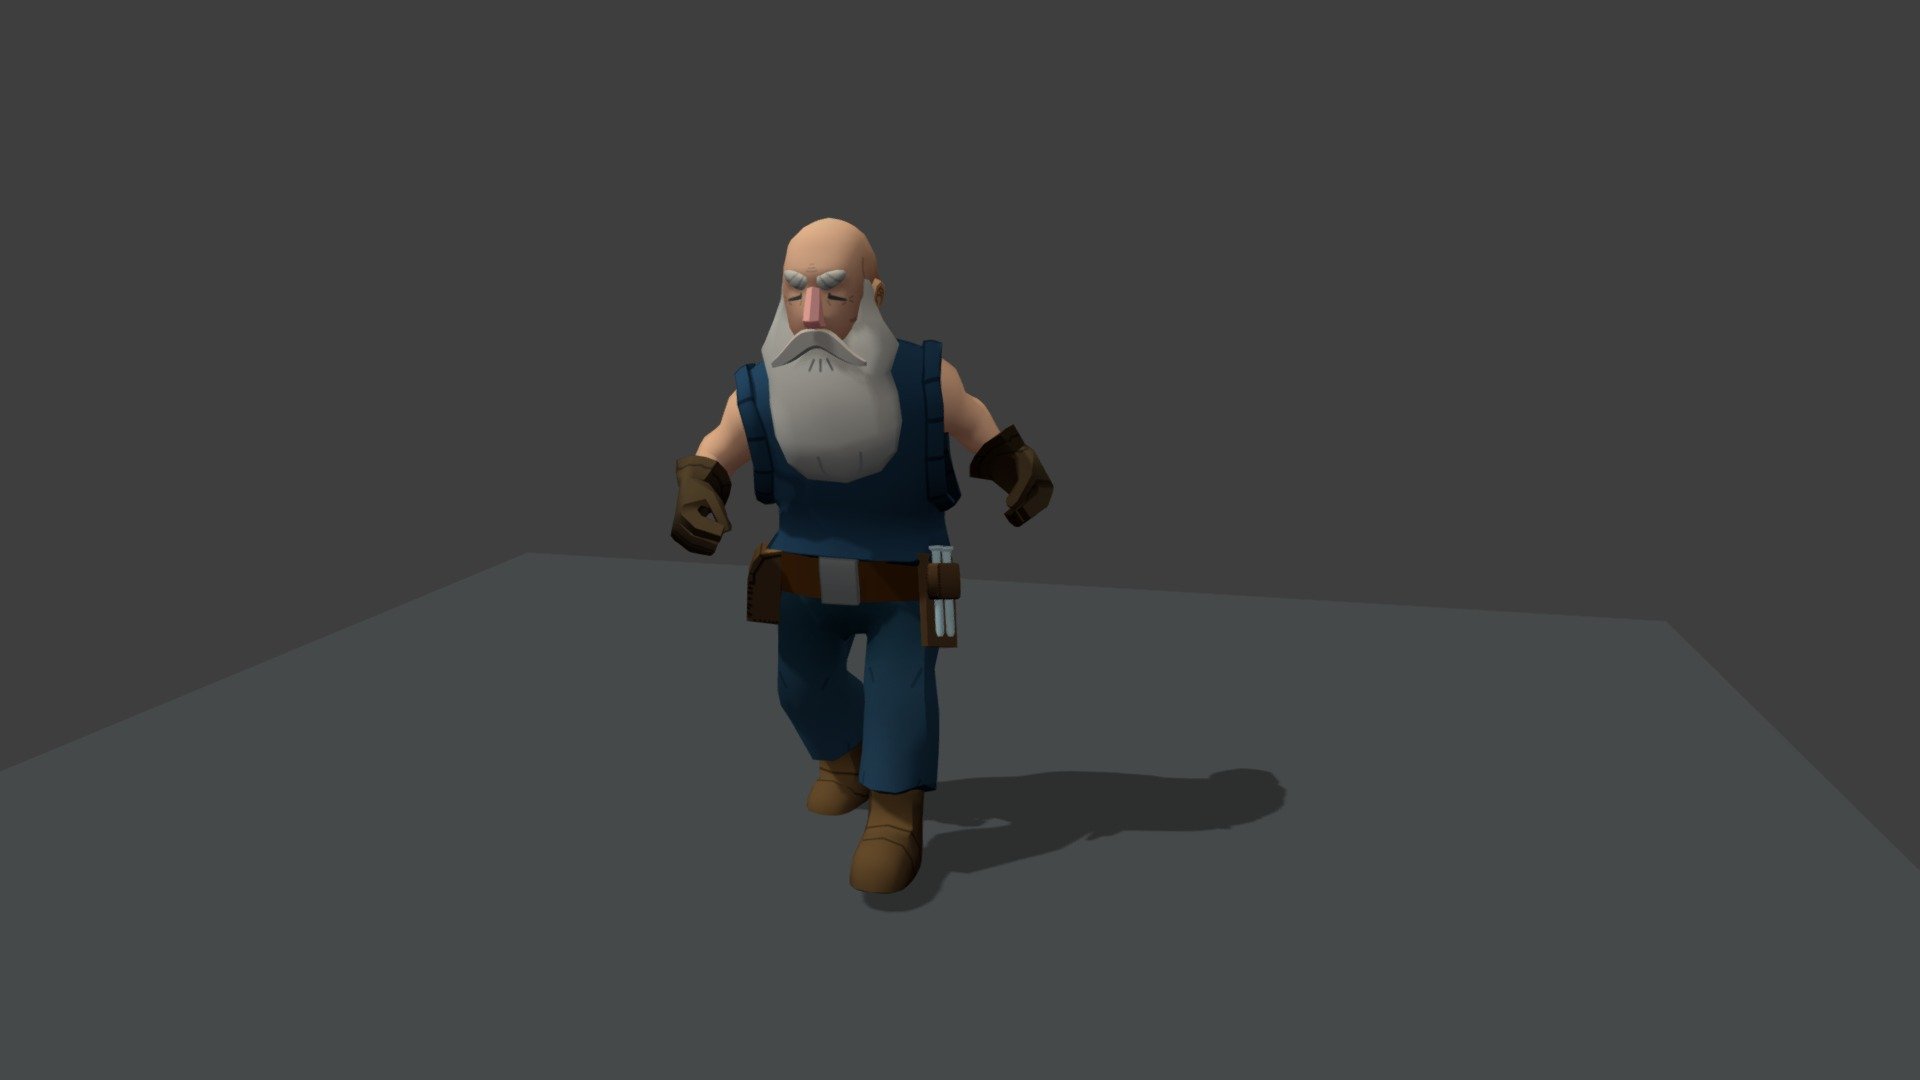 Made a simple walk cycle for this Old man character 3d model